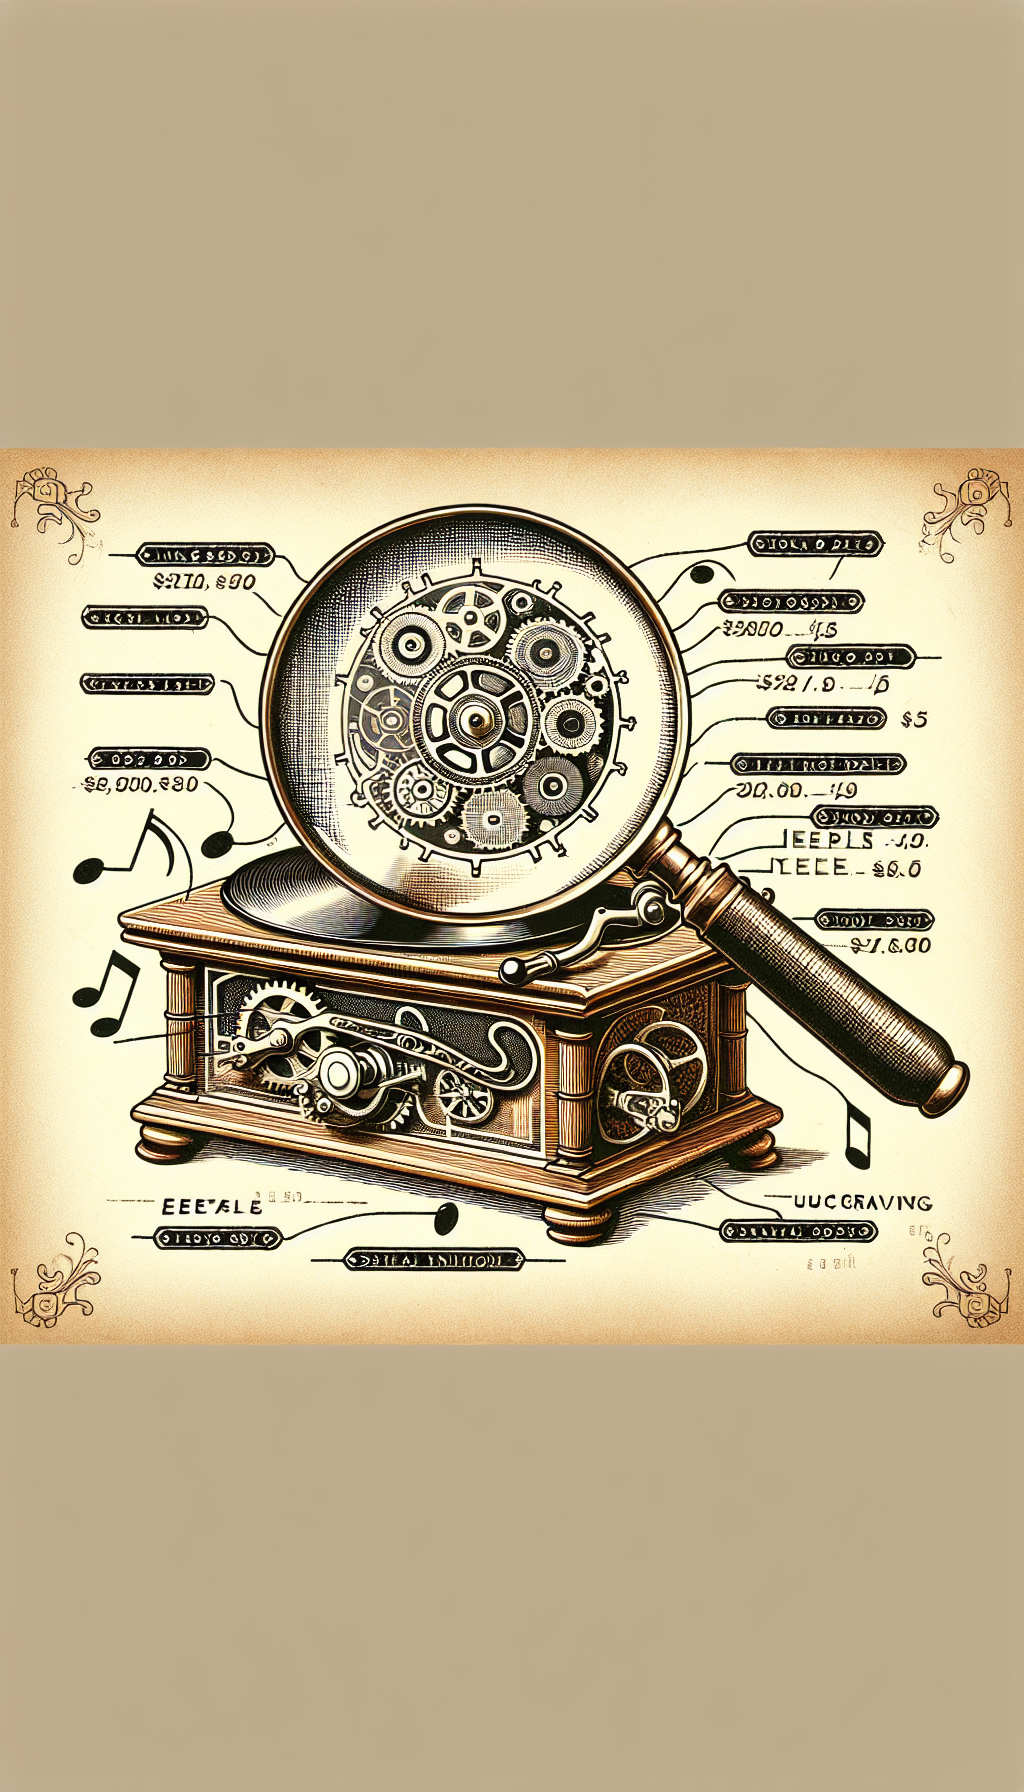 An illustration depicts a magnifying glass hovering over an ornate Victrola, with visible notes and price tags emanating from components like the turntable, needle, and horn. The magnifying glass reveals the inner cogs and engraved serial numbers, symbolizing close scrutiny. The image is rendered in sepia tones with ink outlines, lending an antique feel to evoke historical assessment and valuation.